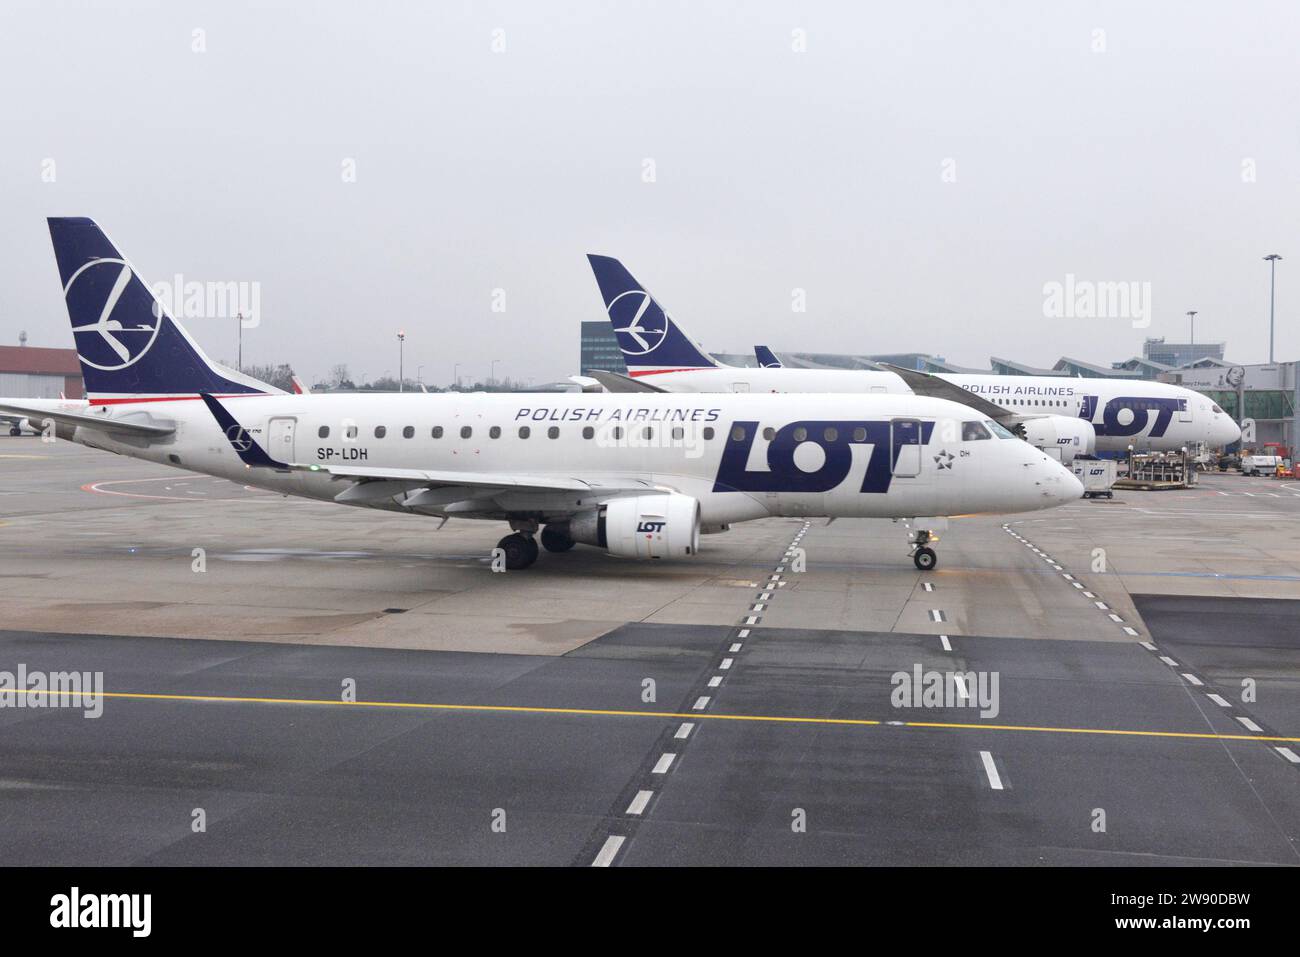 Embraer ERJ-170LR ERJ-170-100 LR at the Warsaw Airport apron or tarmac general view of LOT Polish airline aircrafts on a cloudy day Stock Photo